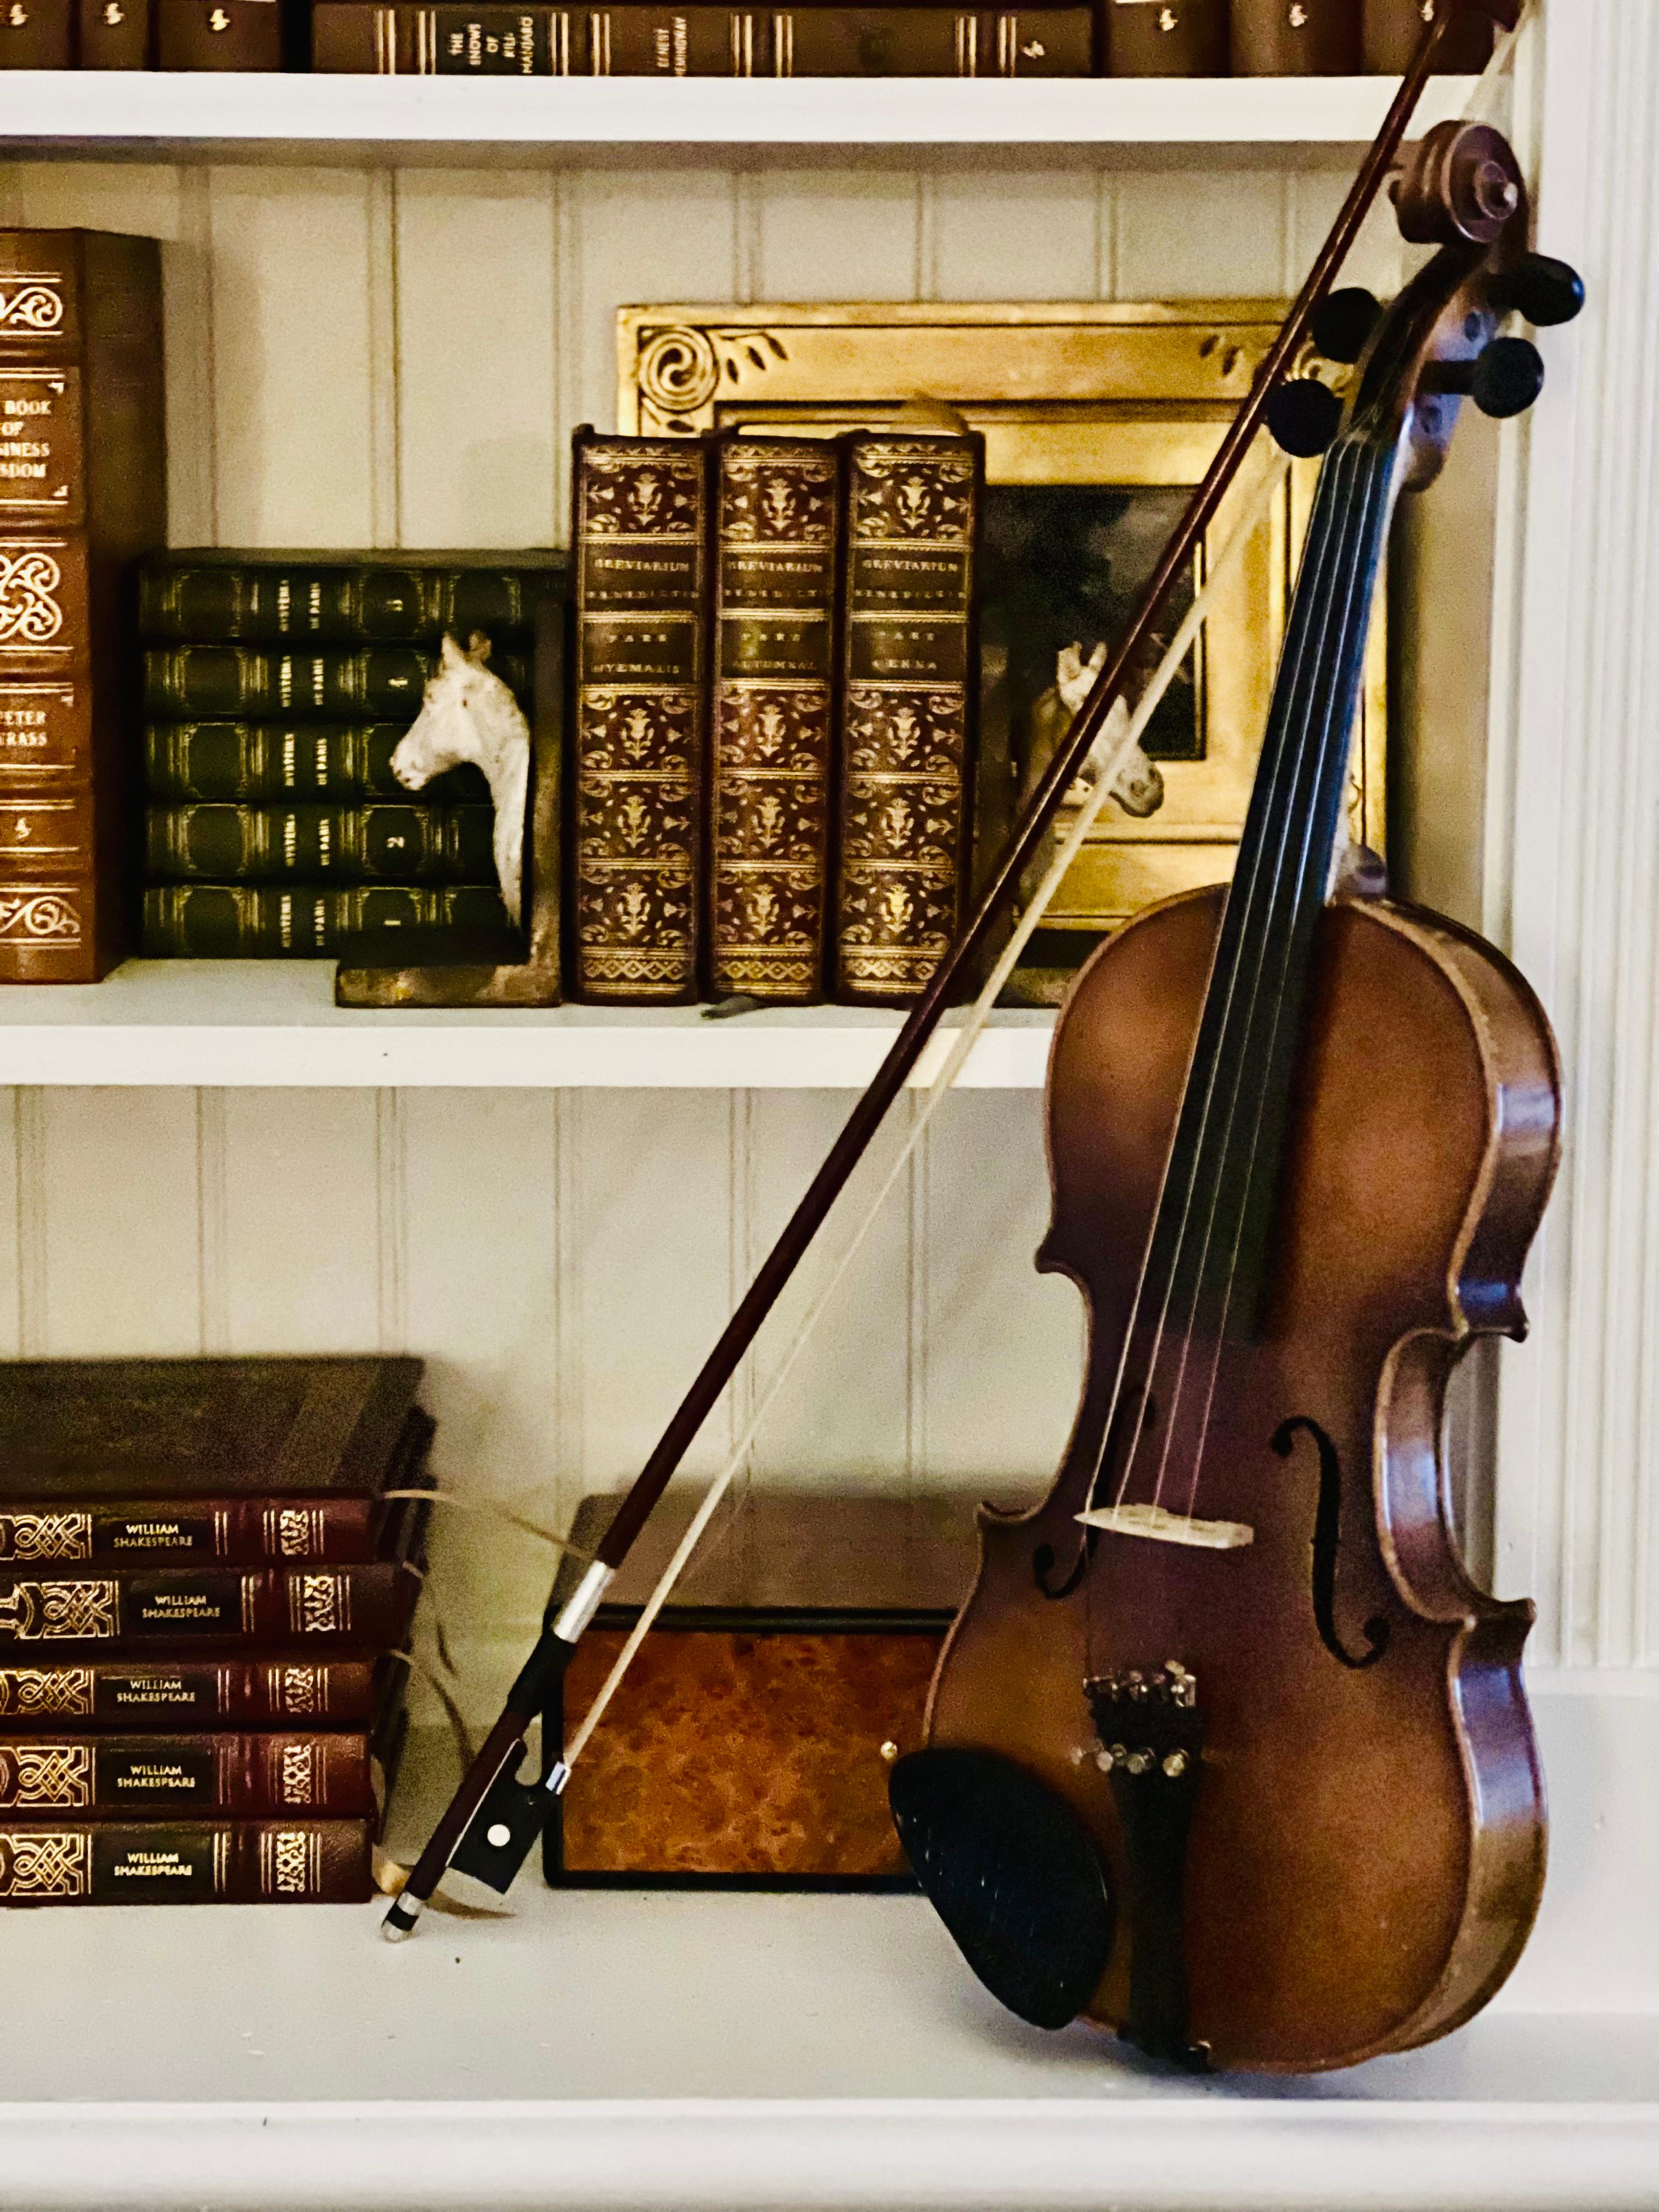 E.R. Pfretzschner 3/4 hand-crafted copy of Antonius Stradivarius violin, made in Germany, 1970. Elegant, rich wood grain and fine craftsmanship showcase the beauty of this violin. It is in good playing condition and comes with case and Eco bow.